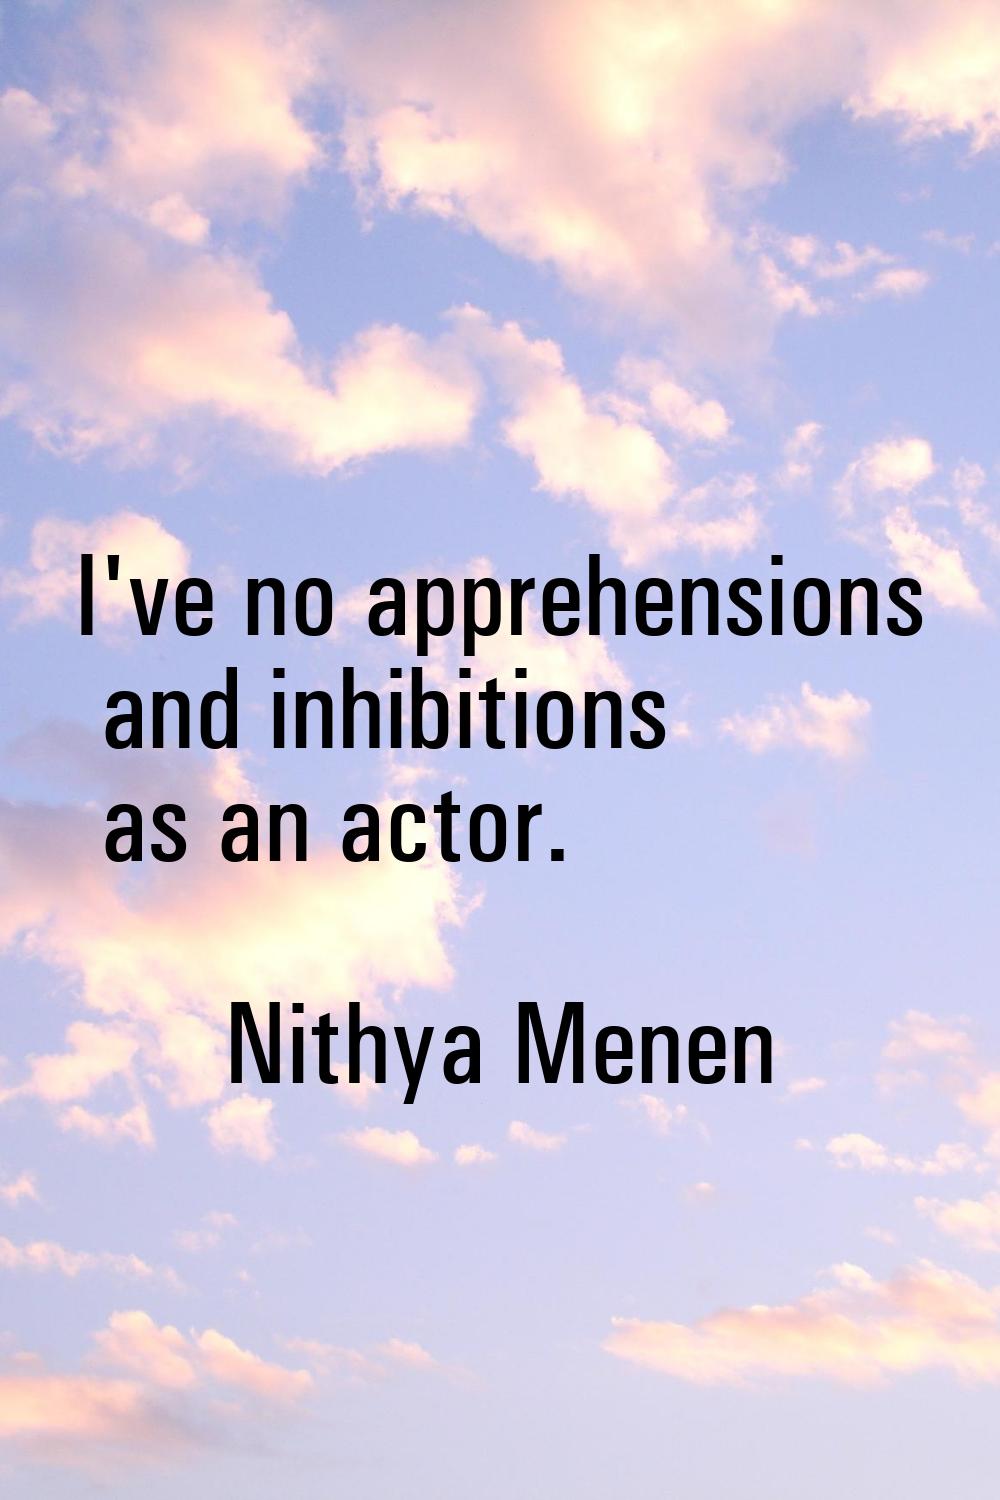 I've no apprehensions and inhibitions as an actor.